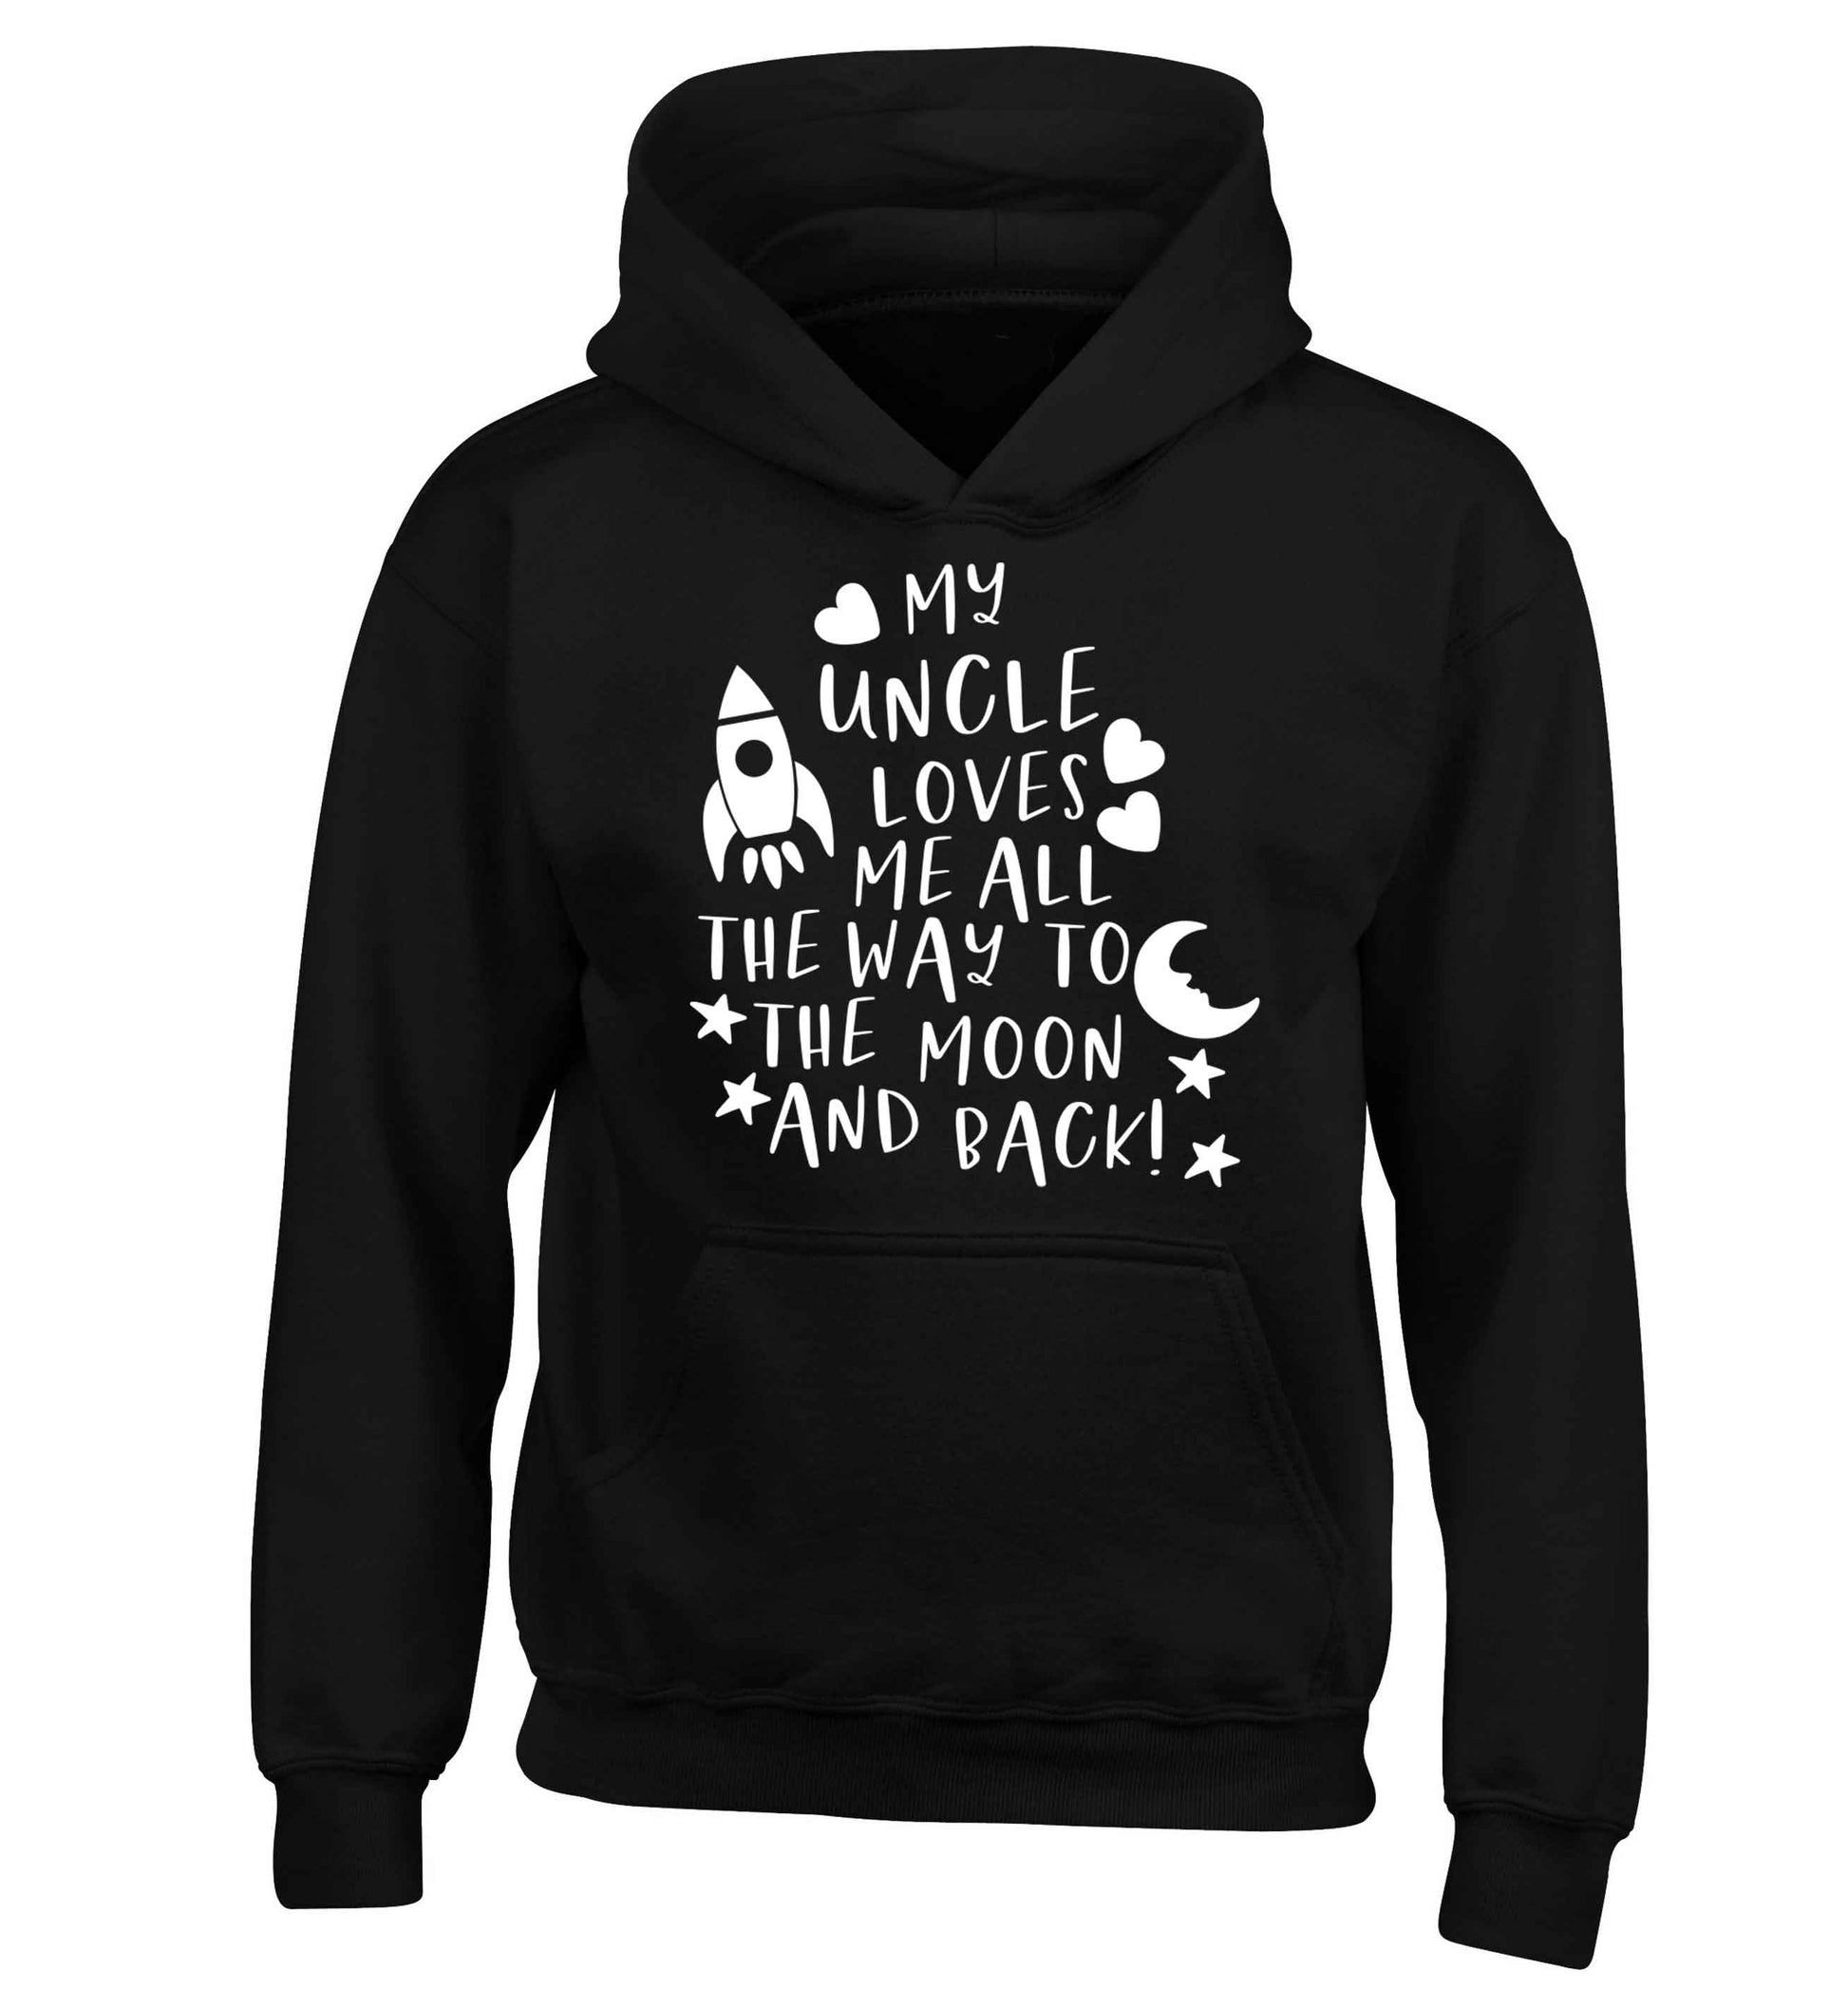 My uncle loves me all the way to the moon and back children's black hoodie 12-13 Years